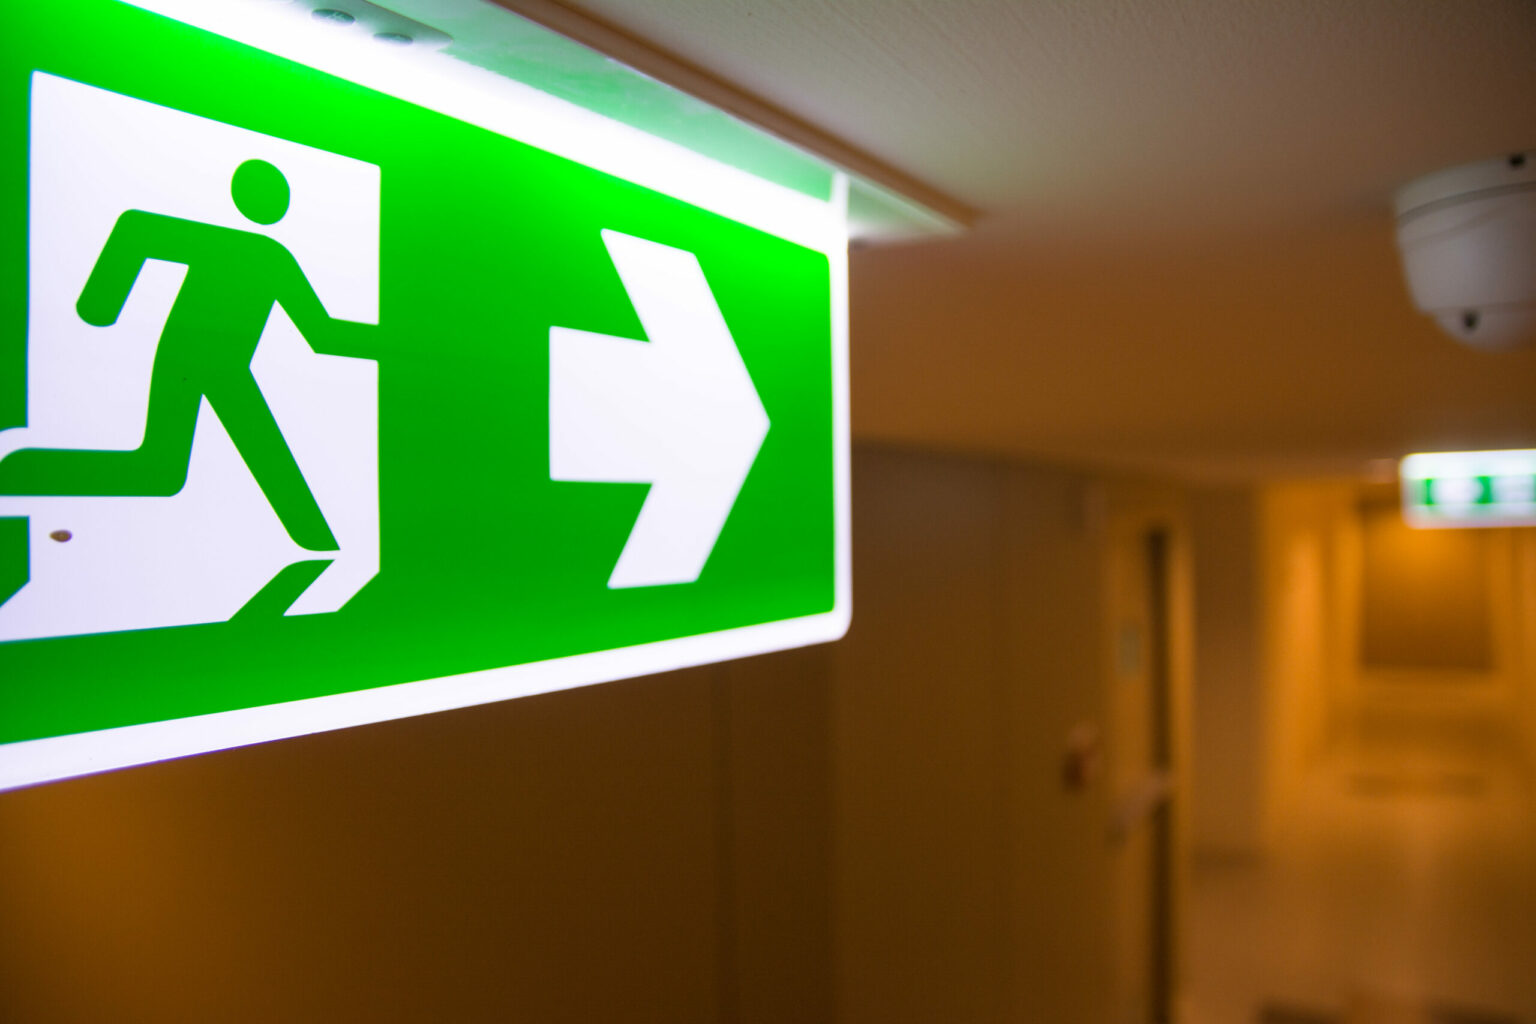 Emergency,Fire,Exit,Sign,At,The,Corridor,In,Building